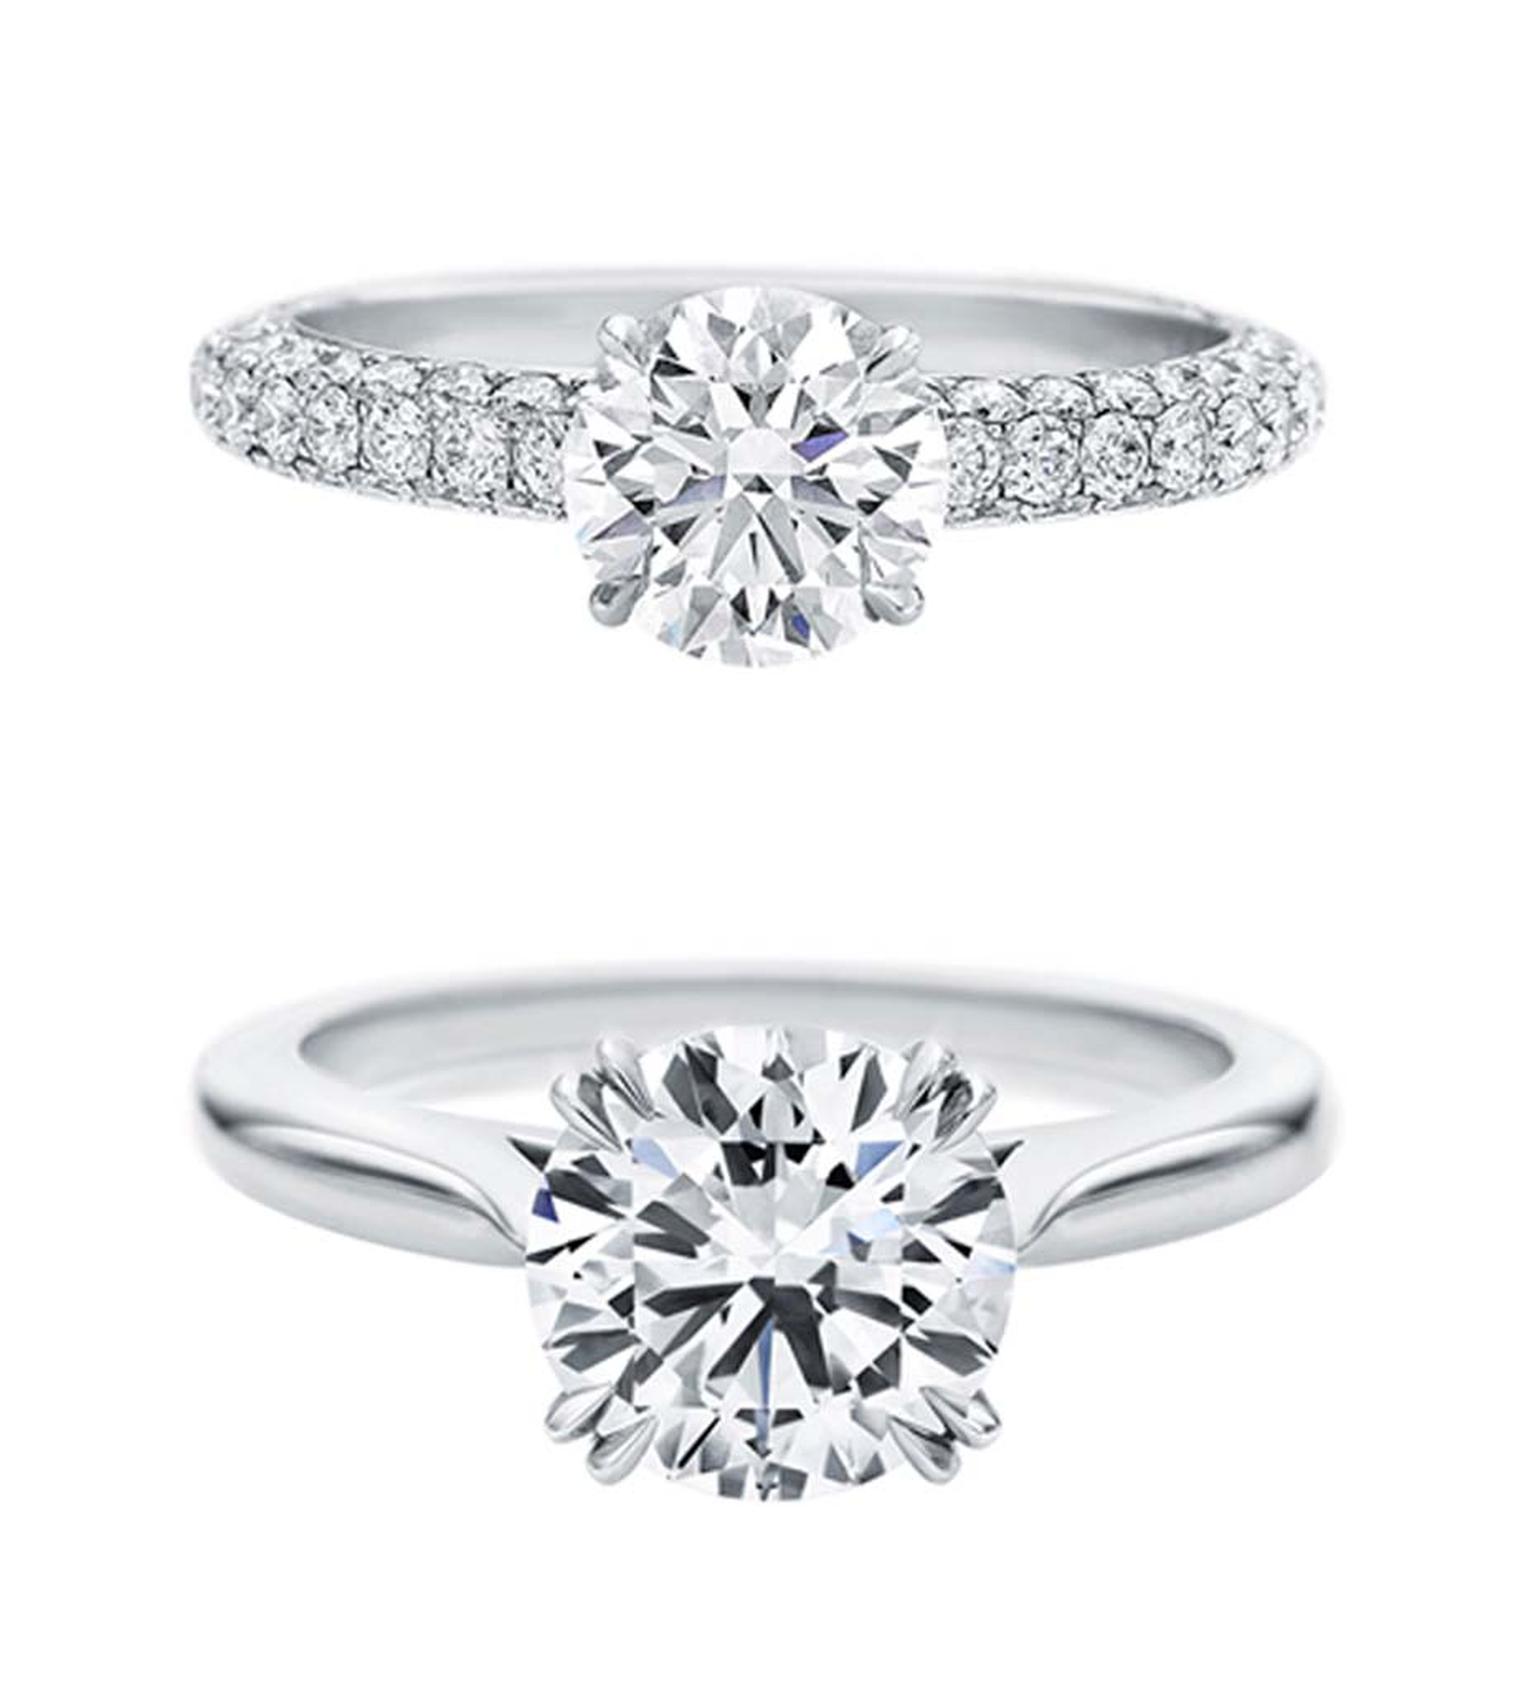 Harry Winston Attraction and Round Brilliant Solitaire diamond engagement rings